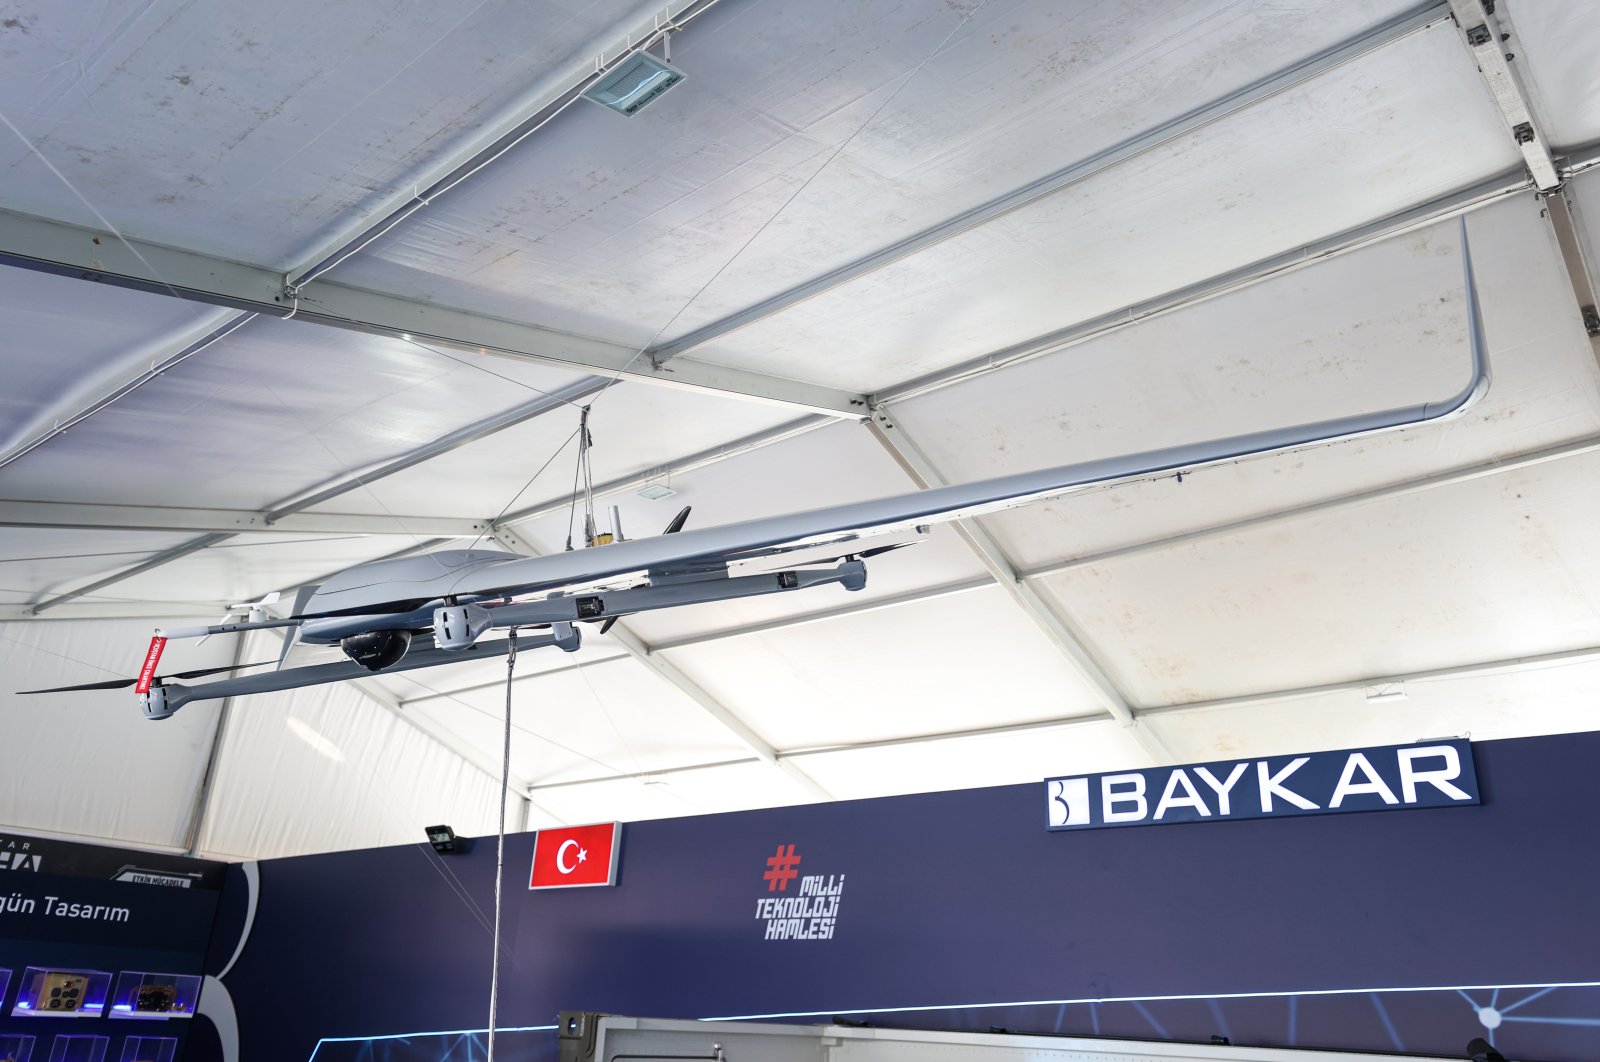 Baykar's vertical take-off and landing (VTOL) unmanned aerial vehicle (UAV) is on display at Turkey’s largest technology and aviation event, Teknofest, in Istanbul, Turkey, Sept. 23, 2021. (AA Photo)